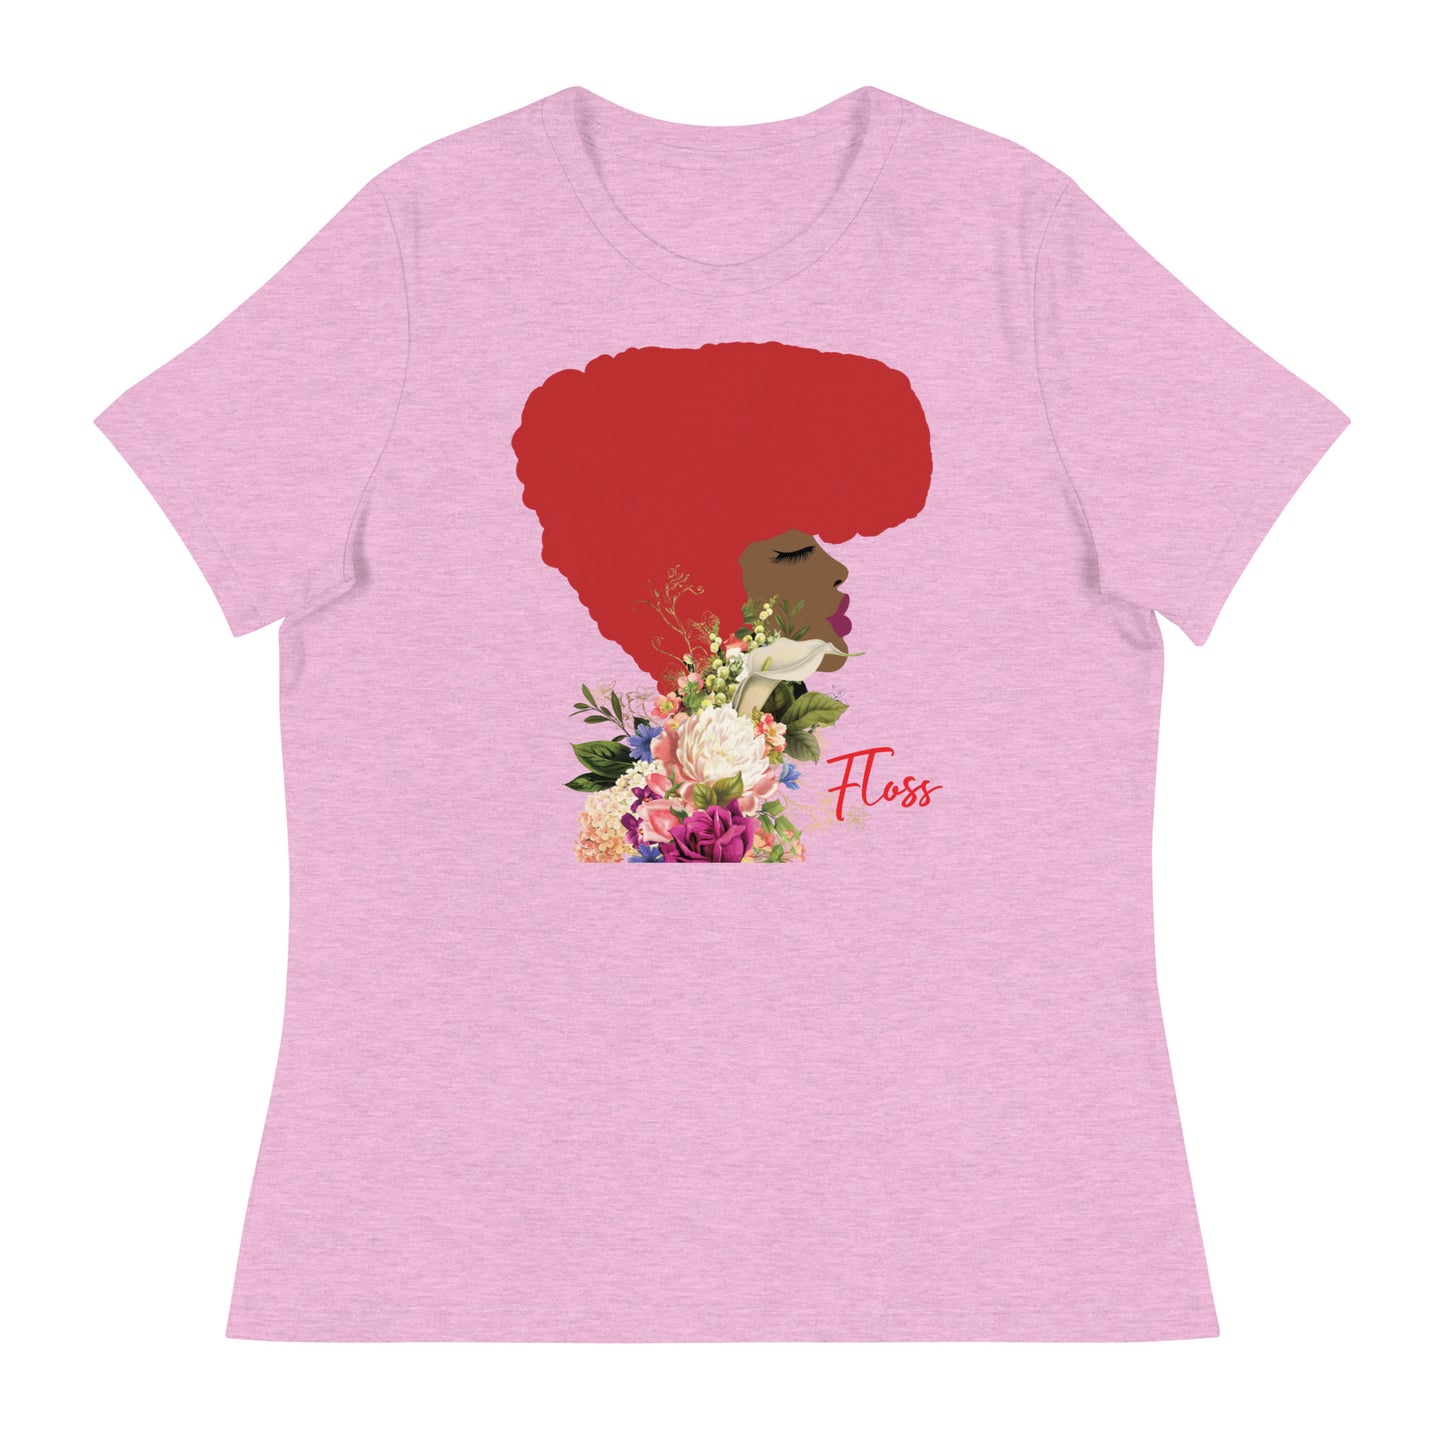 Fly All The Time (Red) - Women's Relaxed  Art Tee